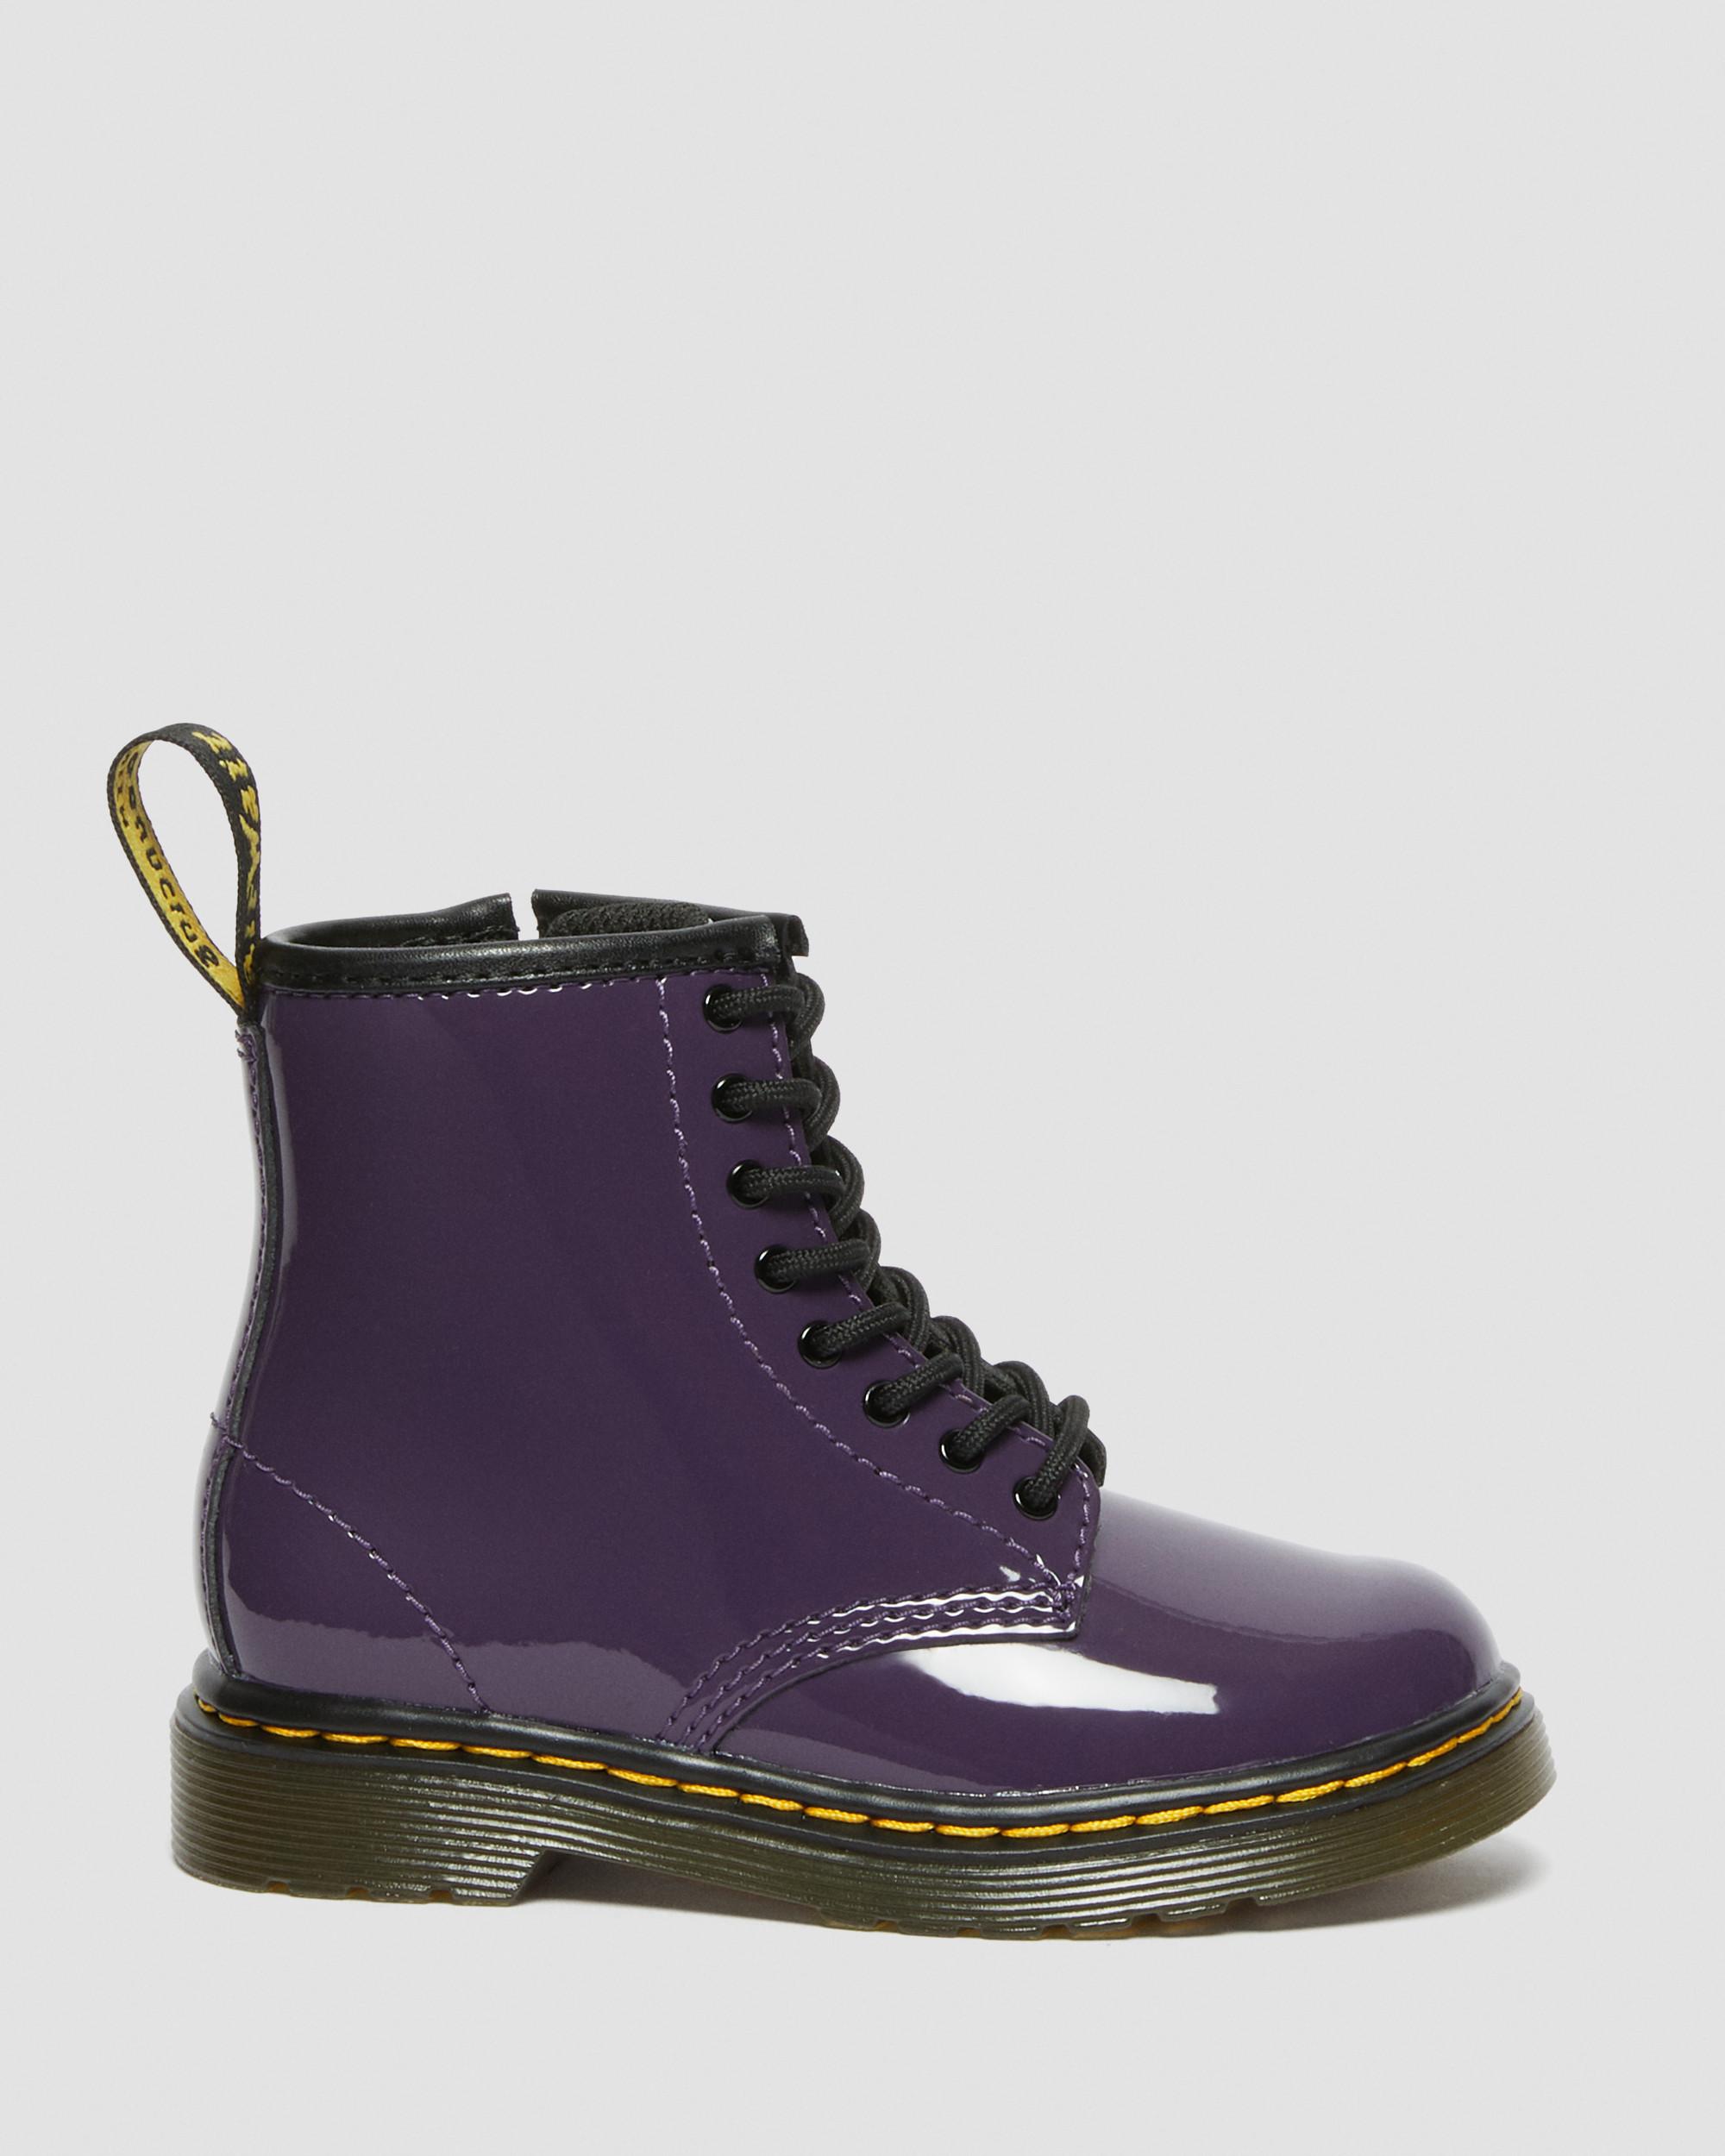 Toddler 1460 Patent Leather Lace Up Boots in Blackcurrant